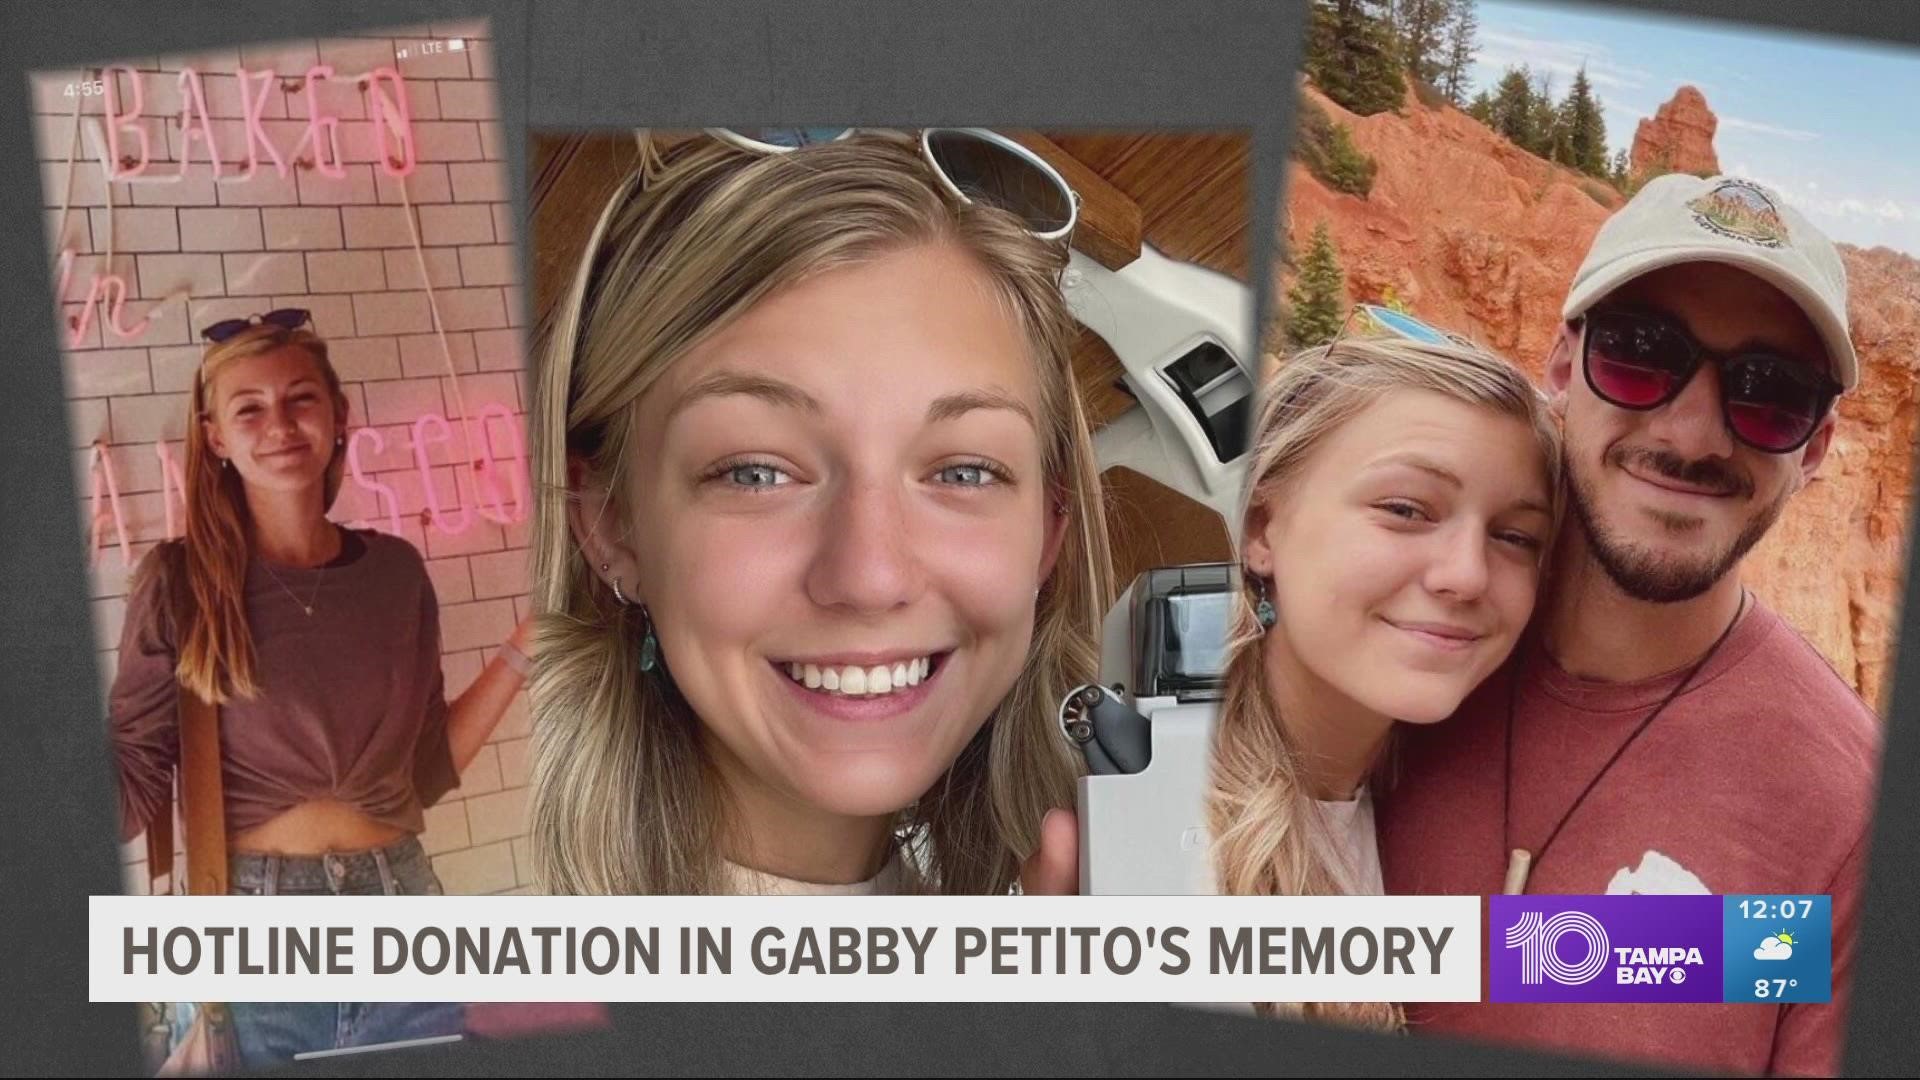 Gabby Petito's mother is using her family's tragedy to help others. She donated $100,000 from the Gabby Petito foundation to the National Domestic Violence Hotline.